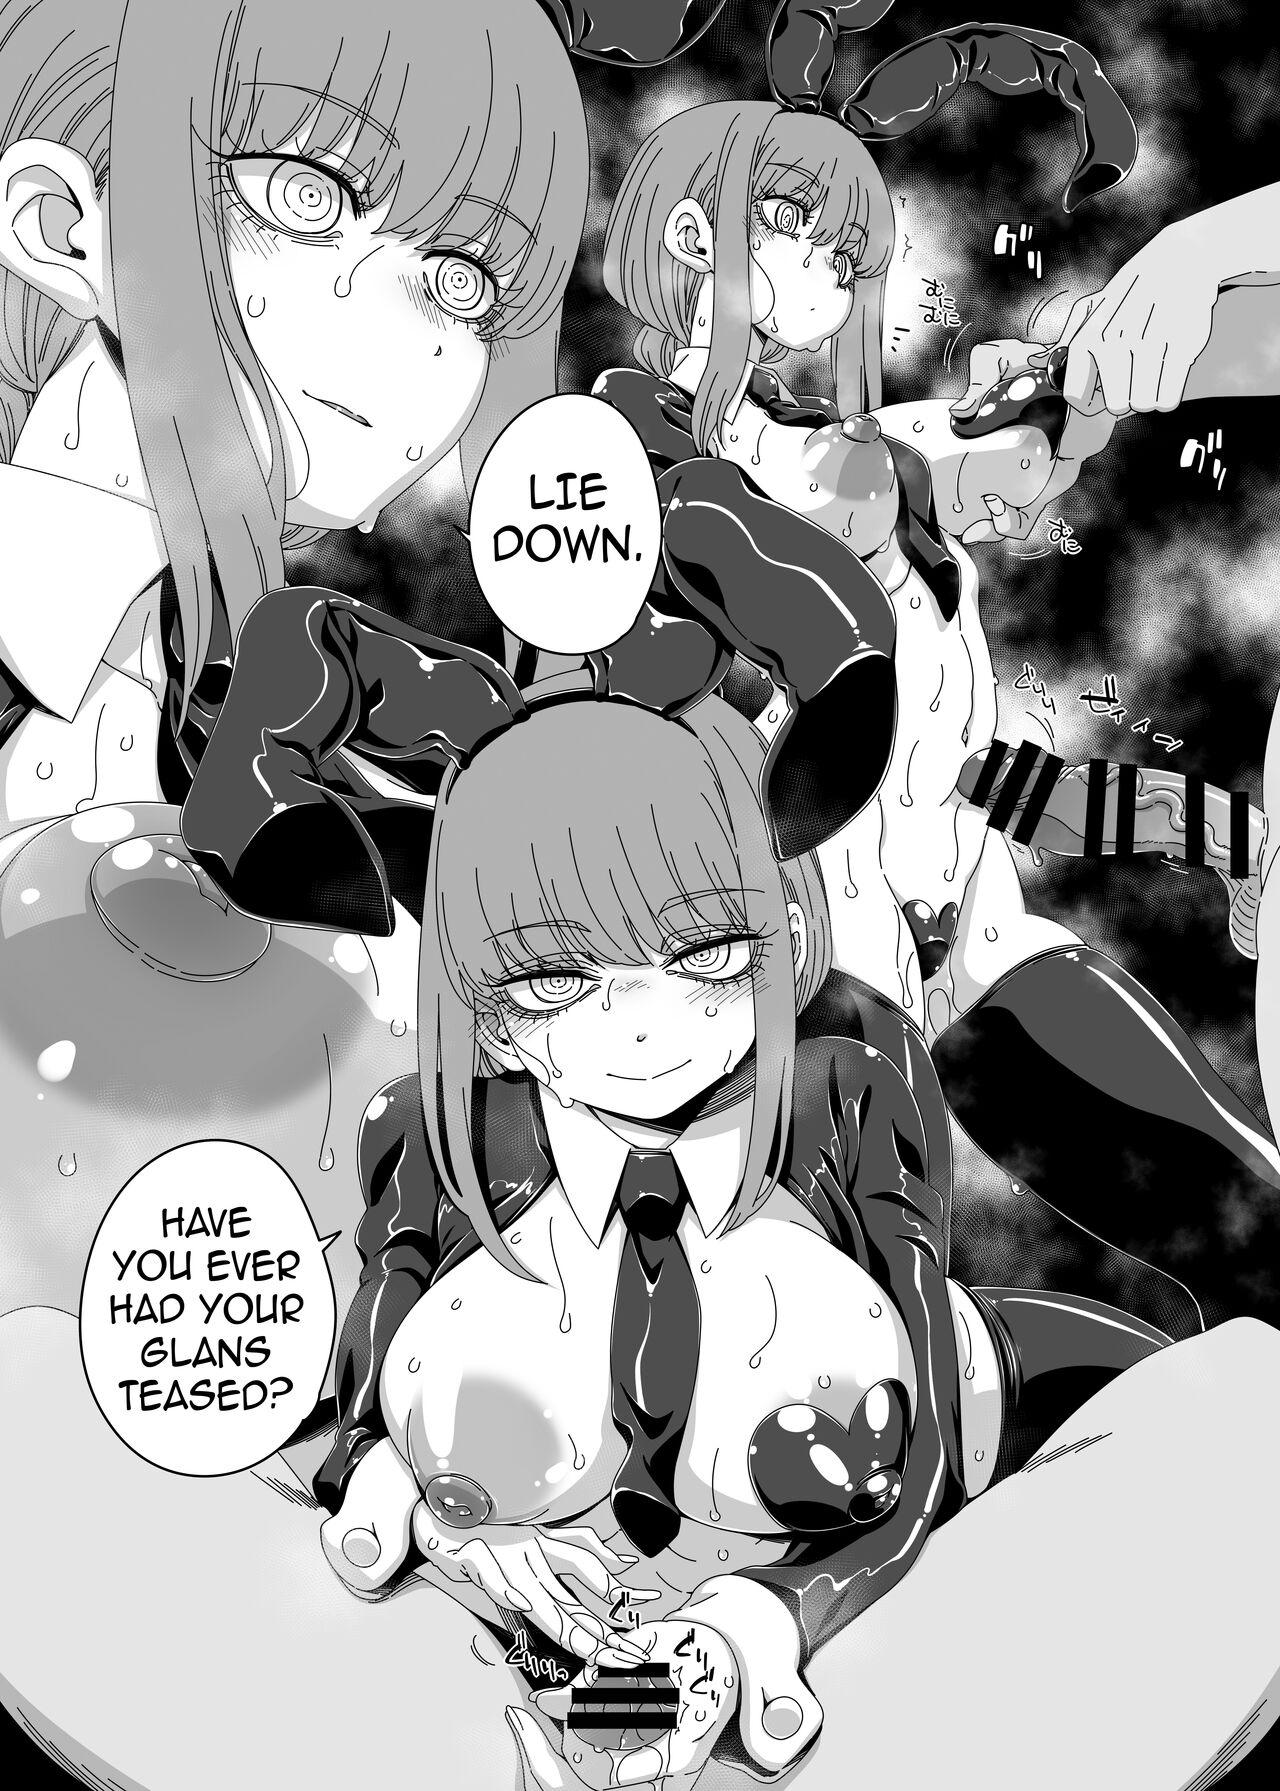 Ametuer Porn Gyaku Bunny Kite Shihai shite Hoshii | I Want Her to Dress Up in an Inverted Bunny Girl Outfit and Dominate Me - Chainsaw man Filipina - Page 10